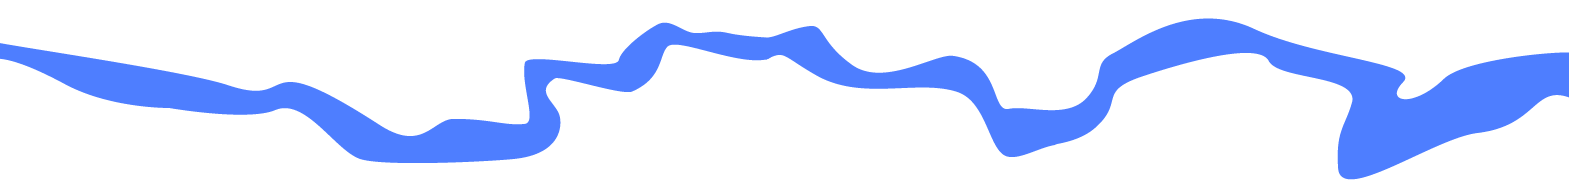 Shape of a river, dividing the text.